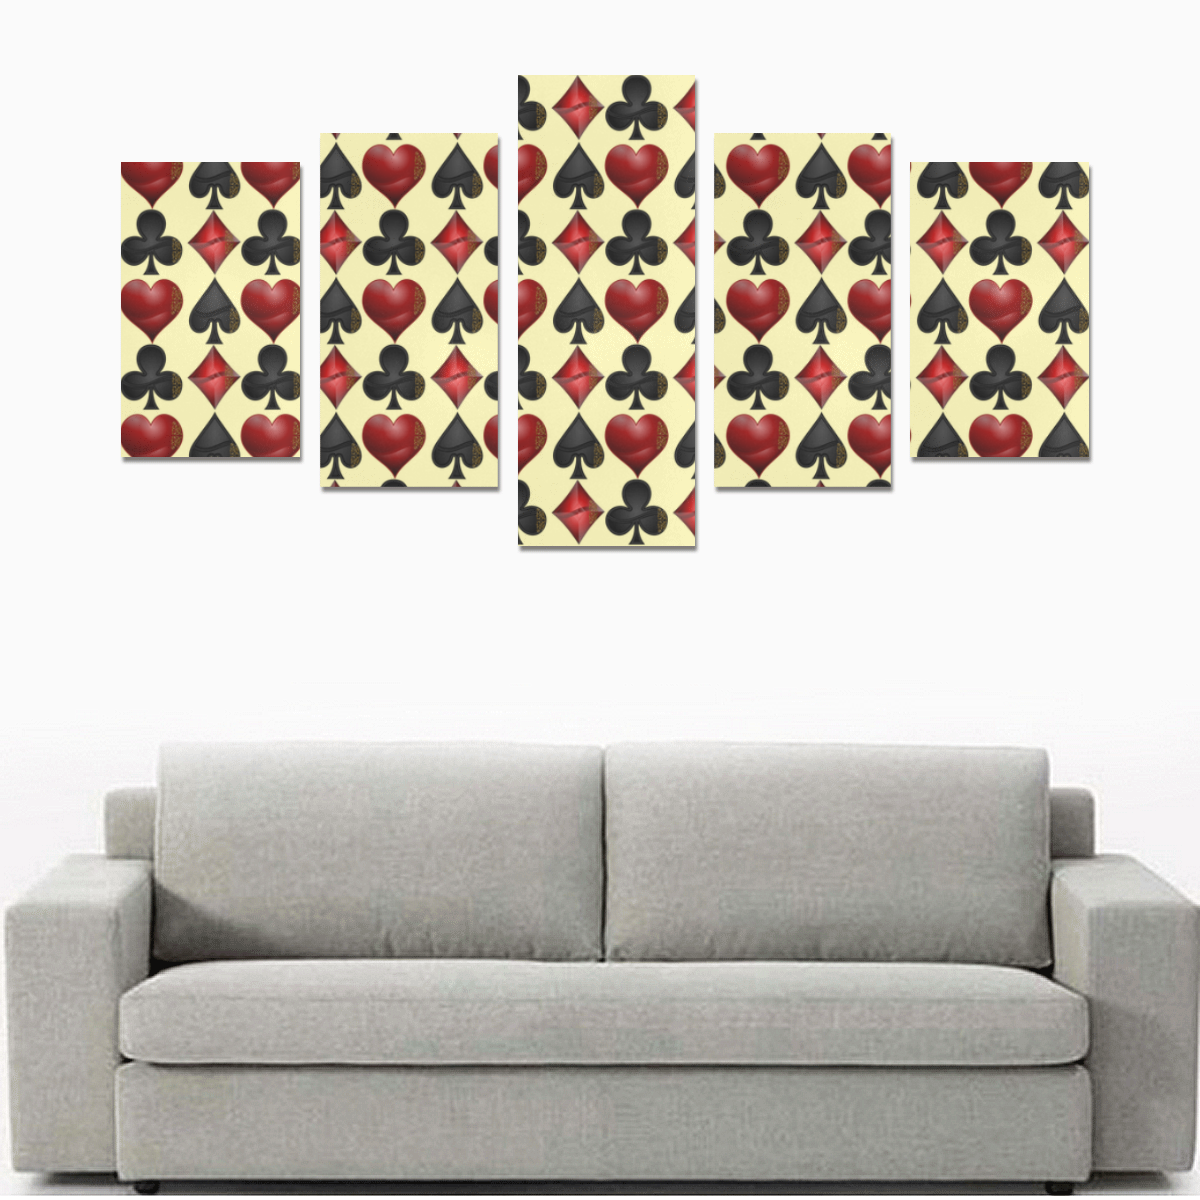 Las Vegas Black and Red Casino Poker Card Shapes on Yellow Canvas Print Sets C (No Frame)